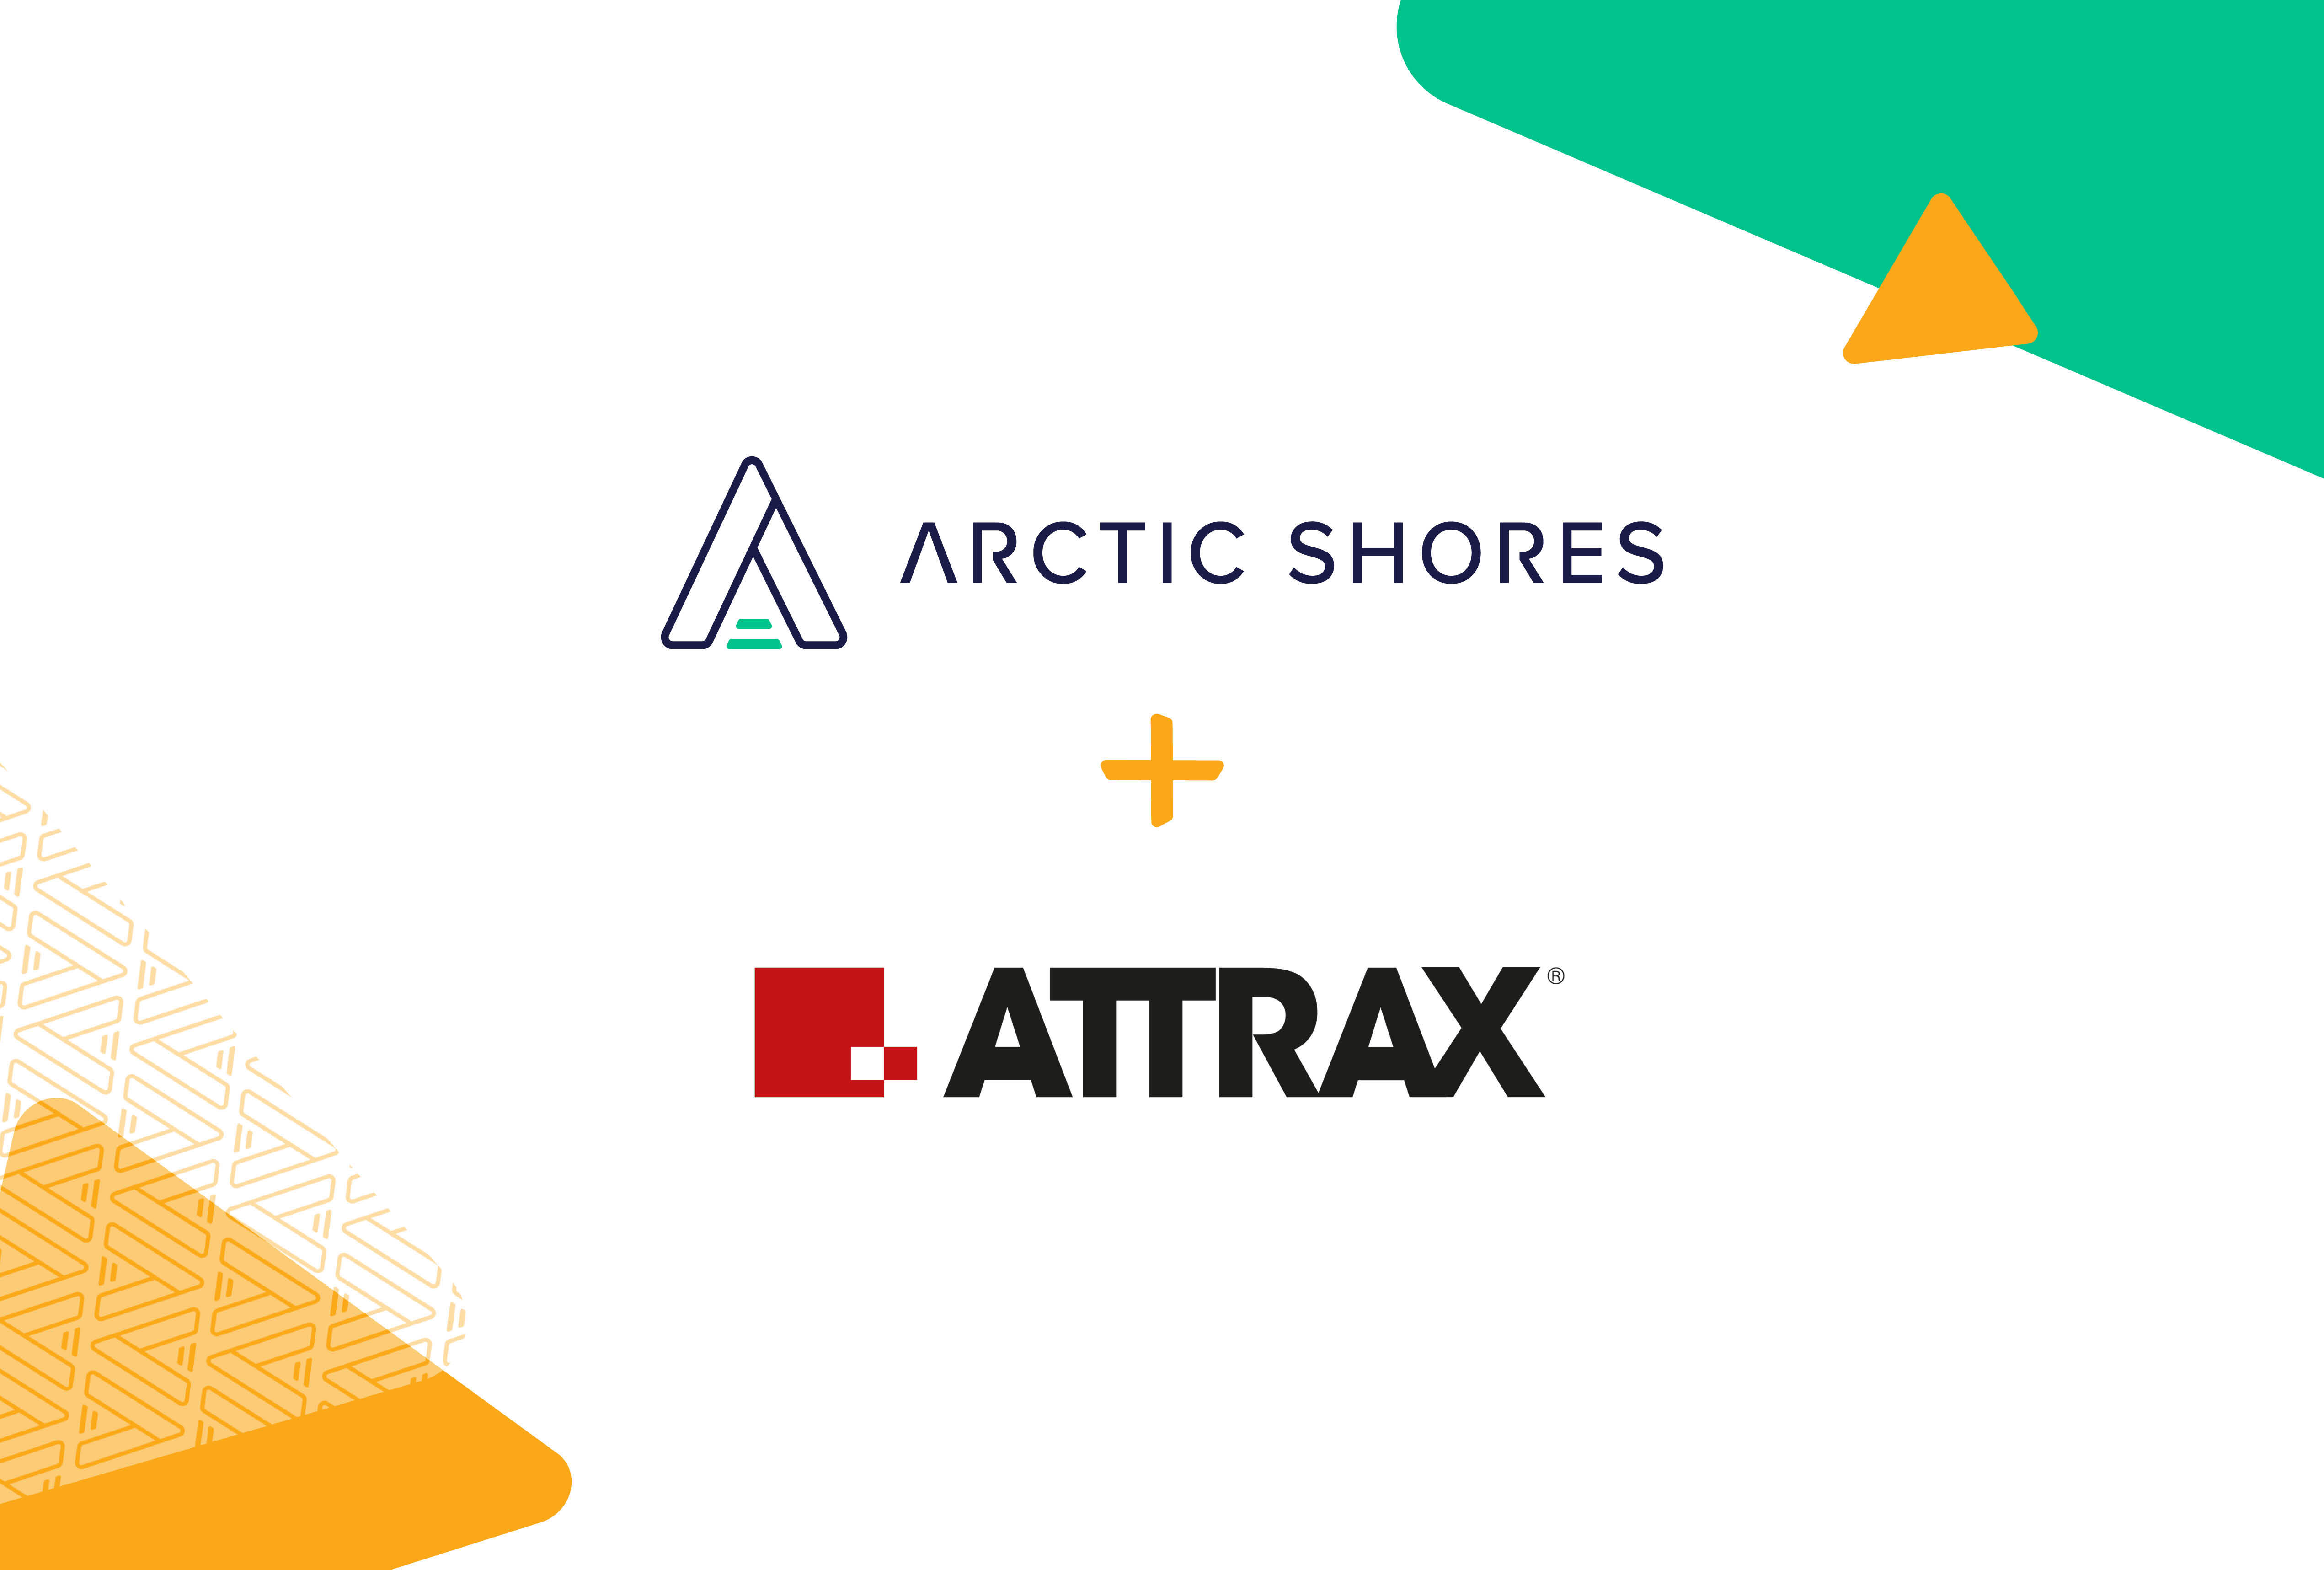 Attracting incredible people, and seeing more in them: Arctic Shores’ new partnership